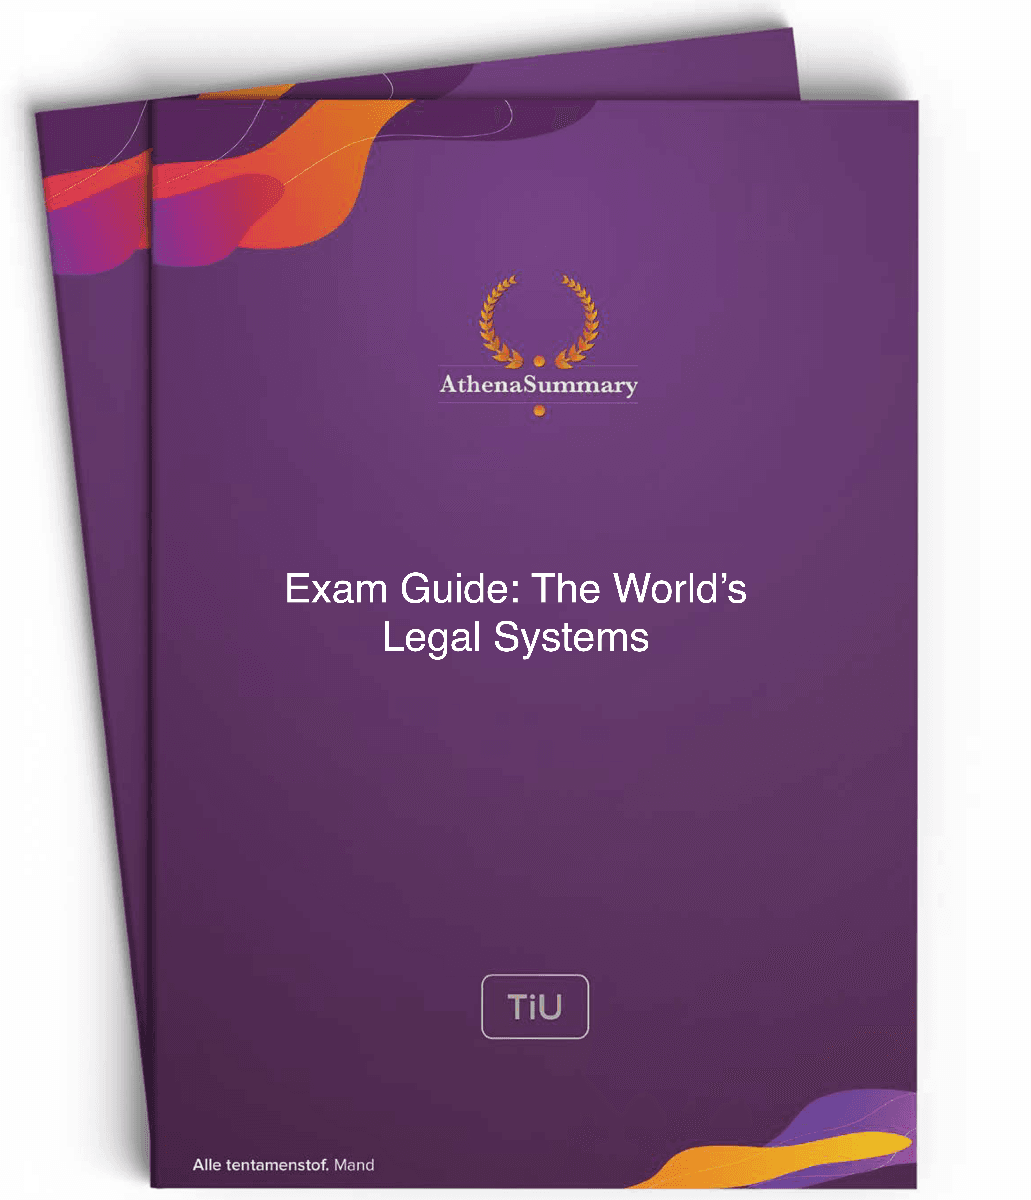 Exam Guide voor The World's Legal Systems